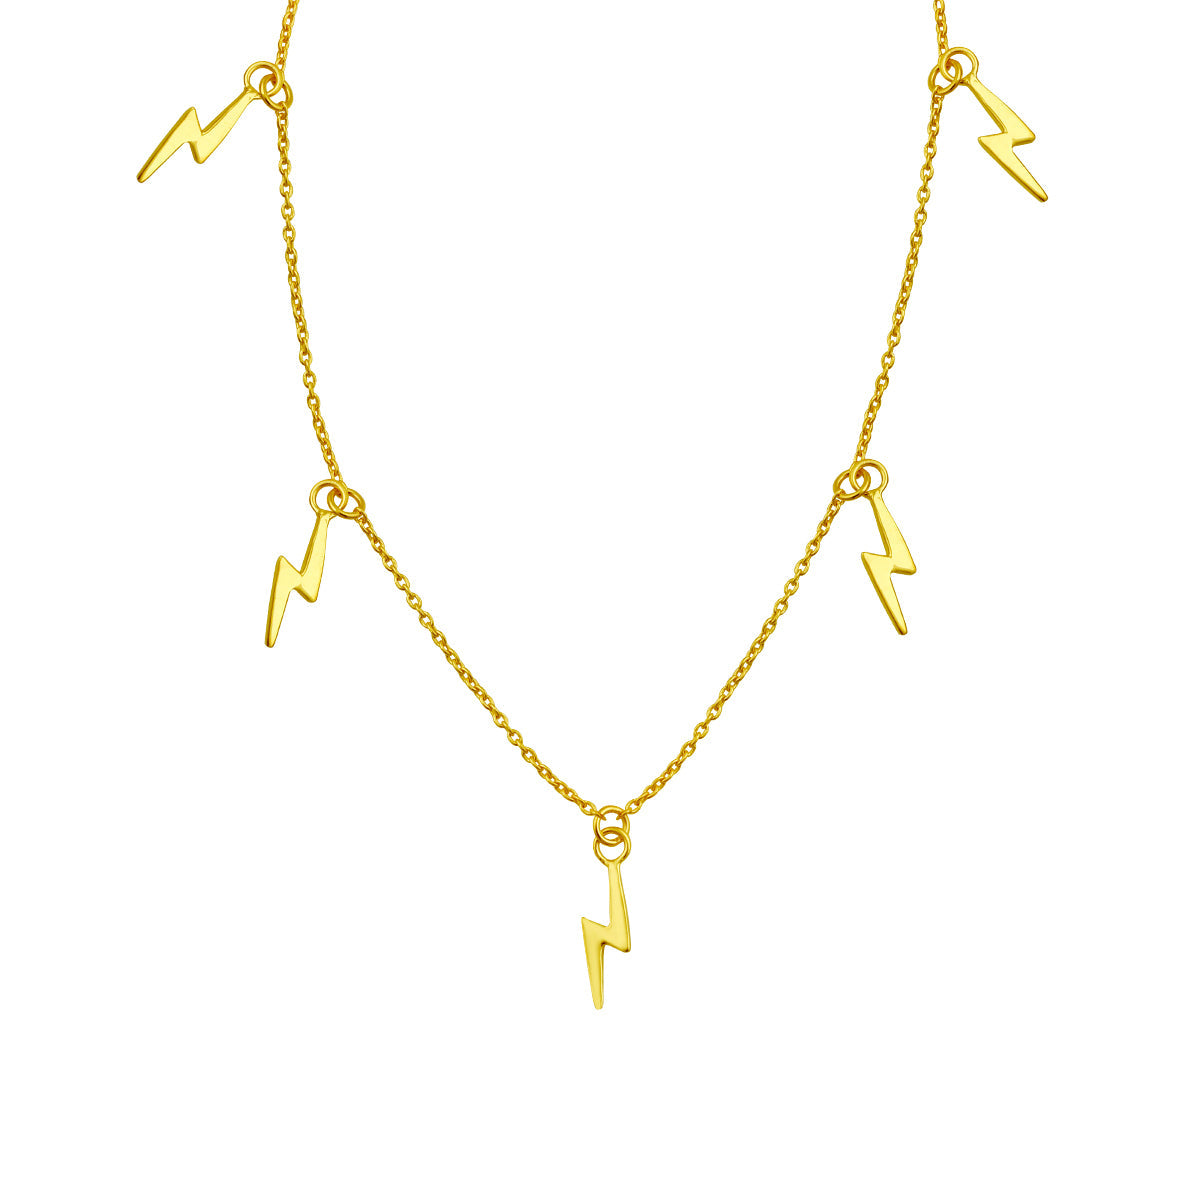 Gold Plated Sterling Silver Multi Lightning 16 Inch Necklace